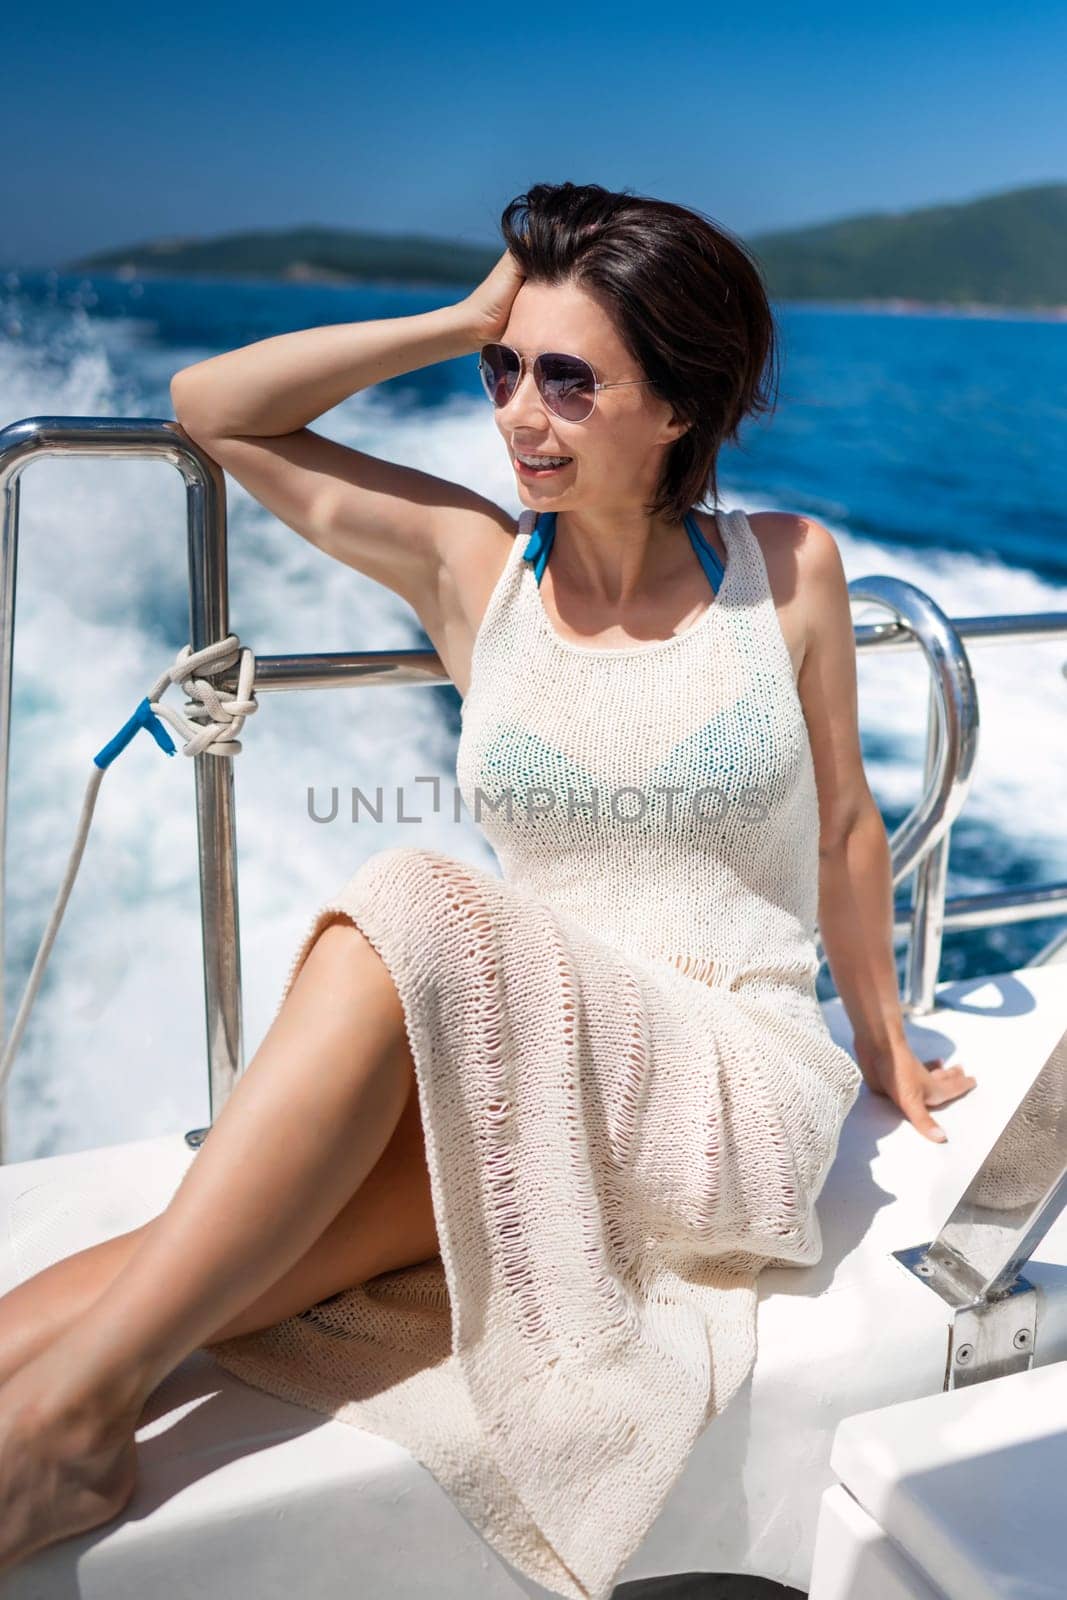 Attractive girl on yacht by tan4ikk1